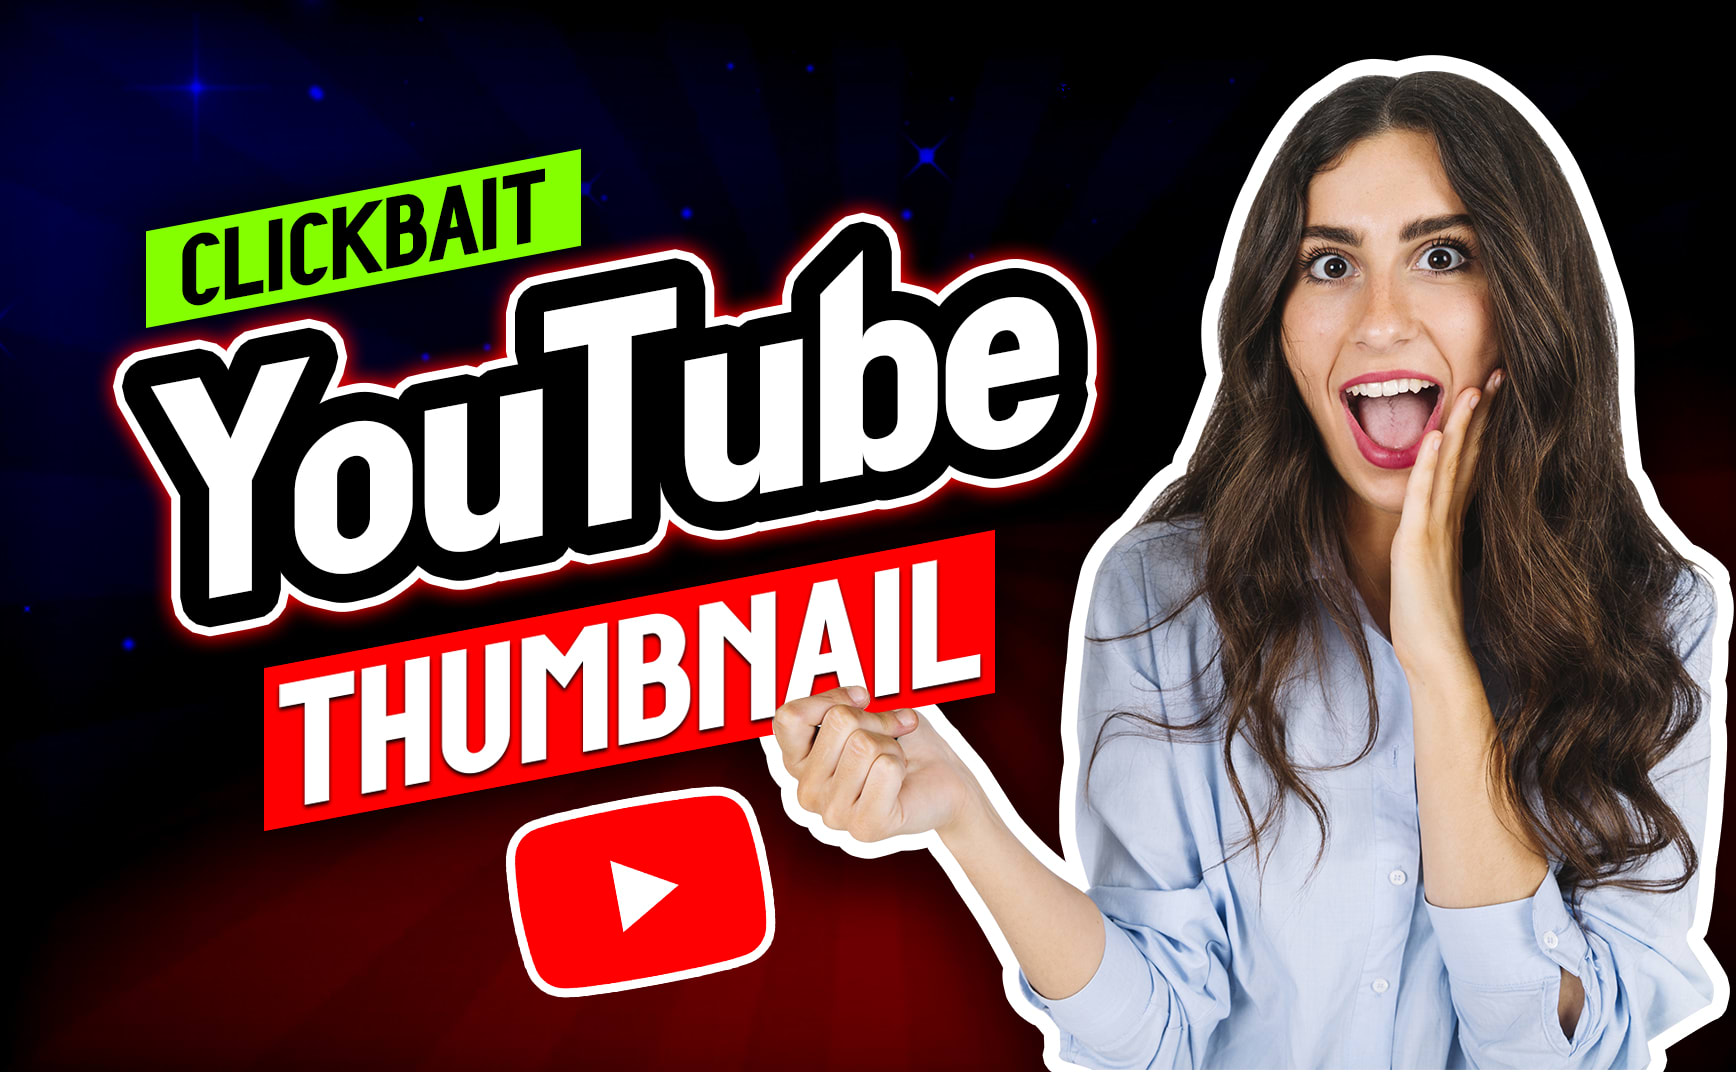 I Will Design Attractive Clickbait YouTube Thumbnail For Viral For 2